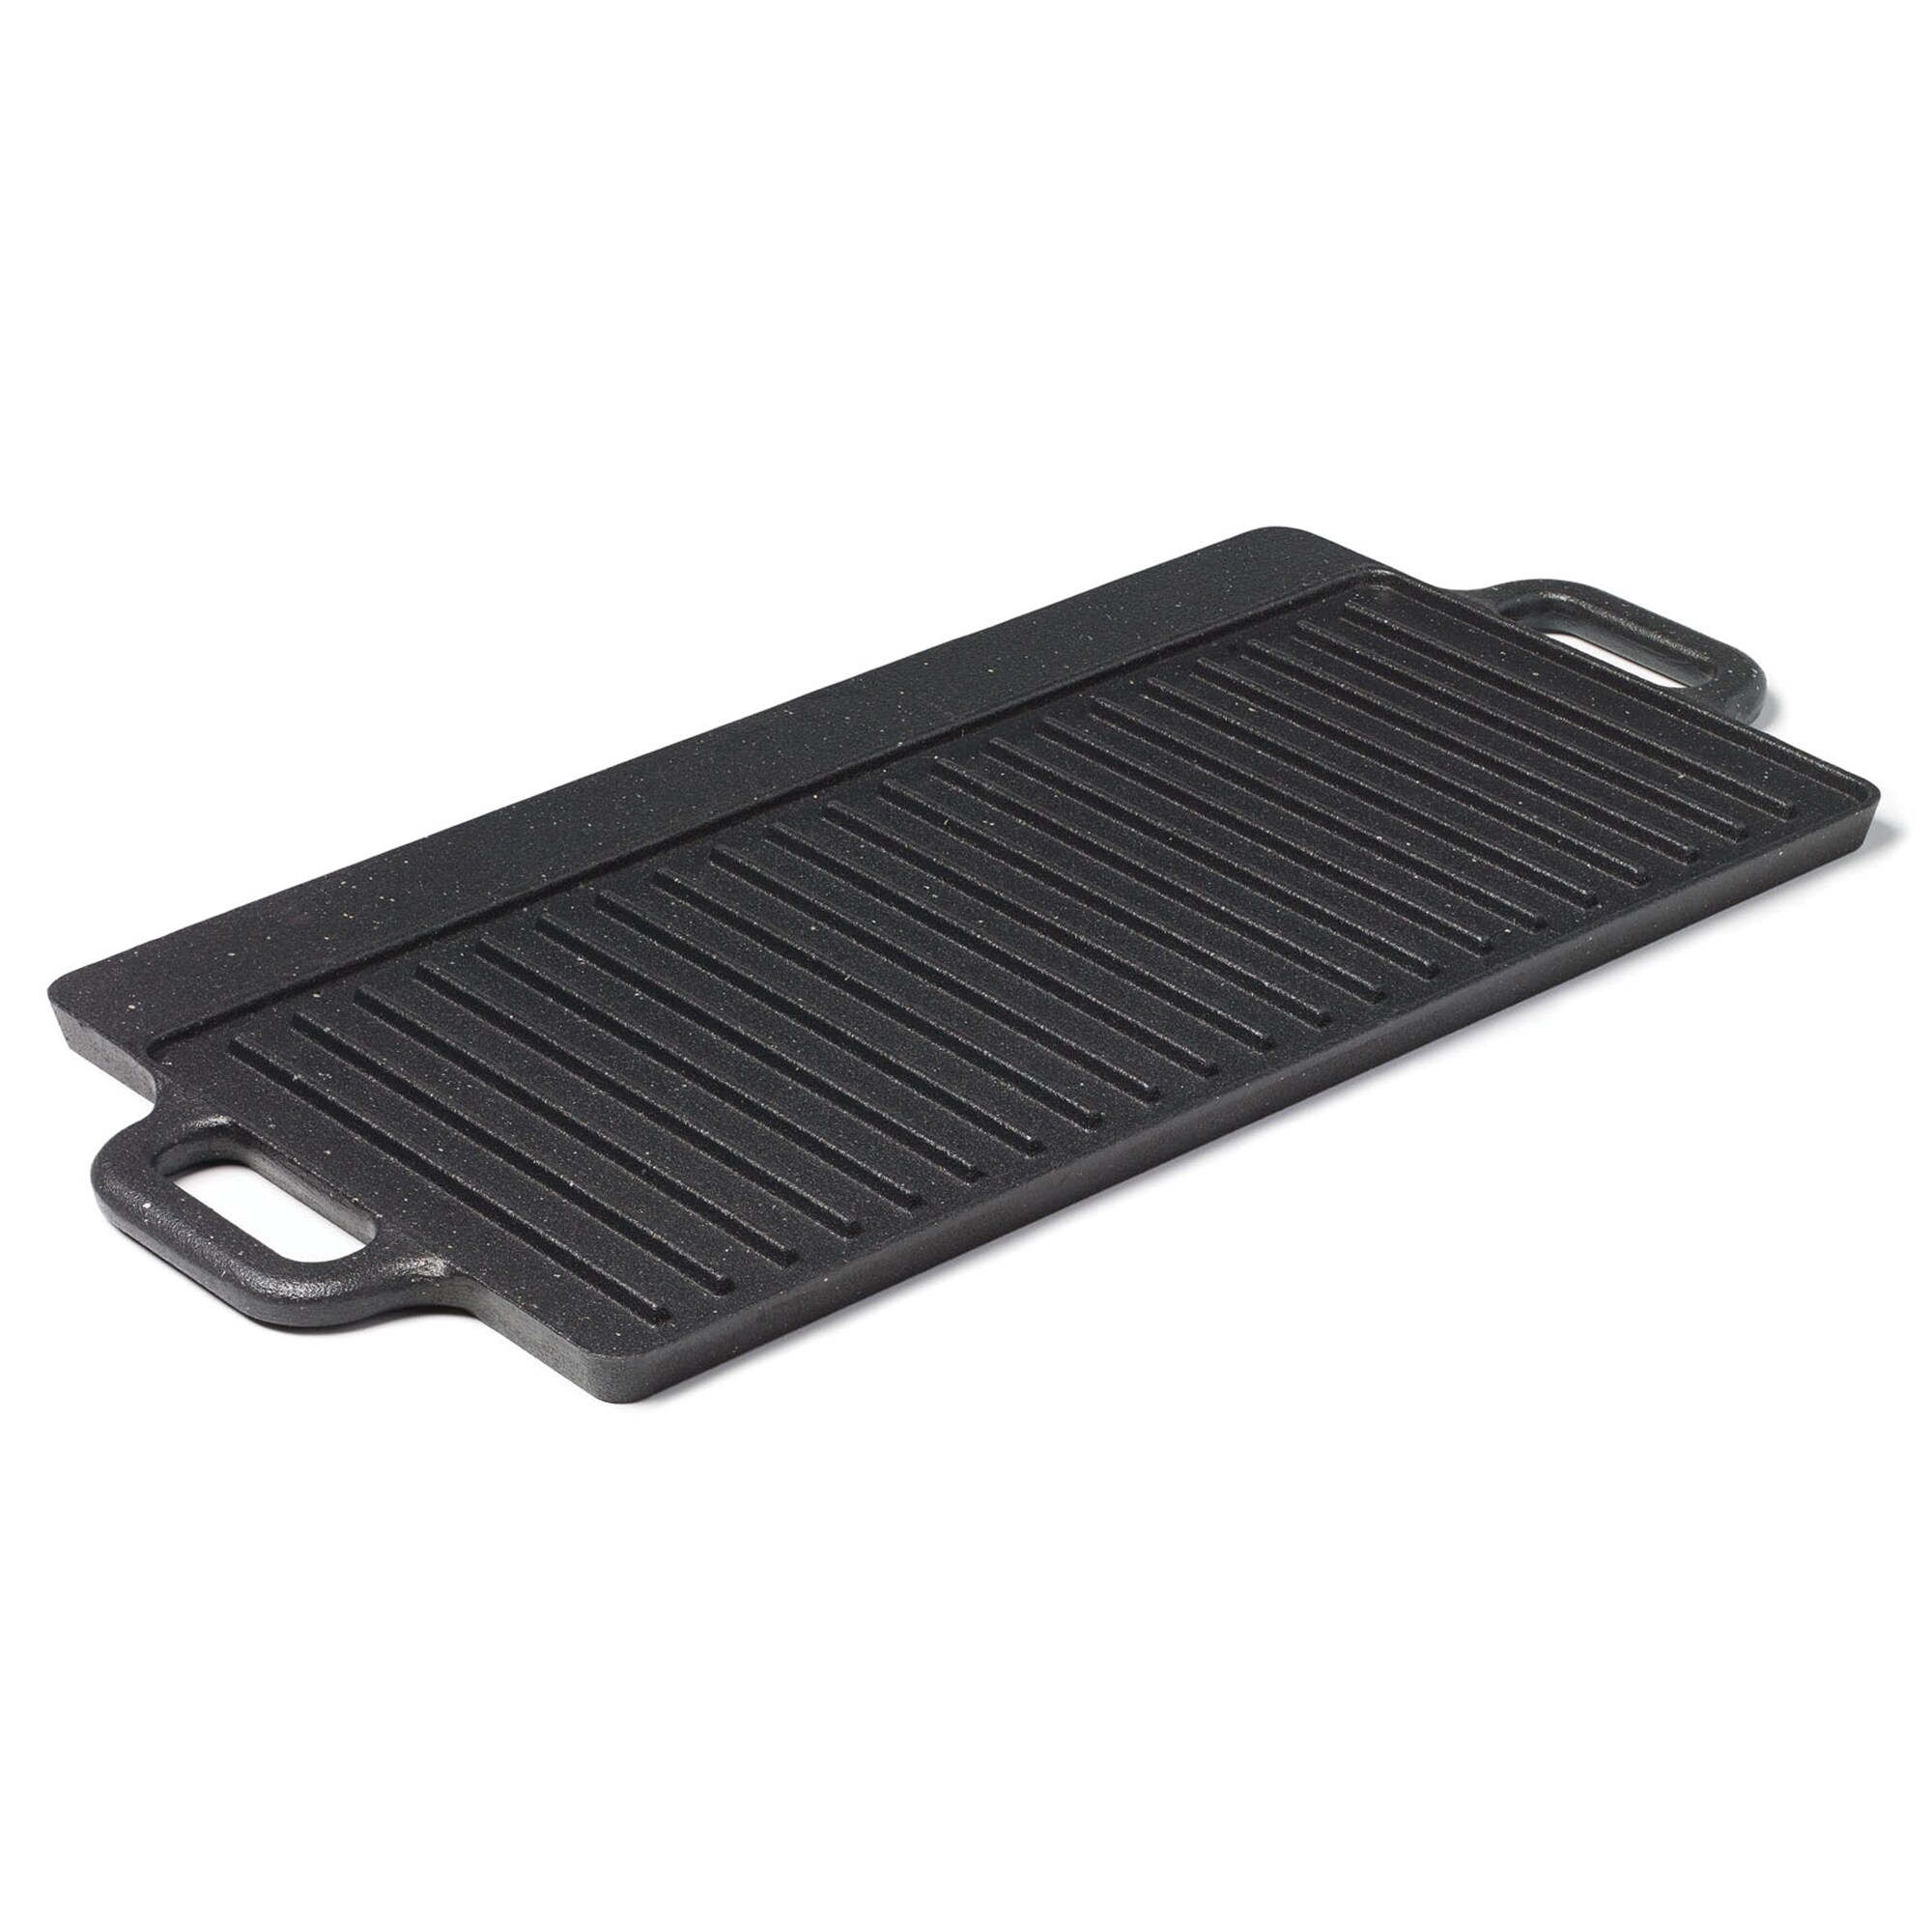 9.25 X 15.75 Two-sided Pre-Seasoned Cast Iron Griddle - Metal